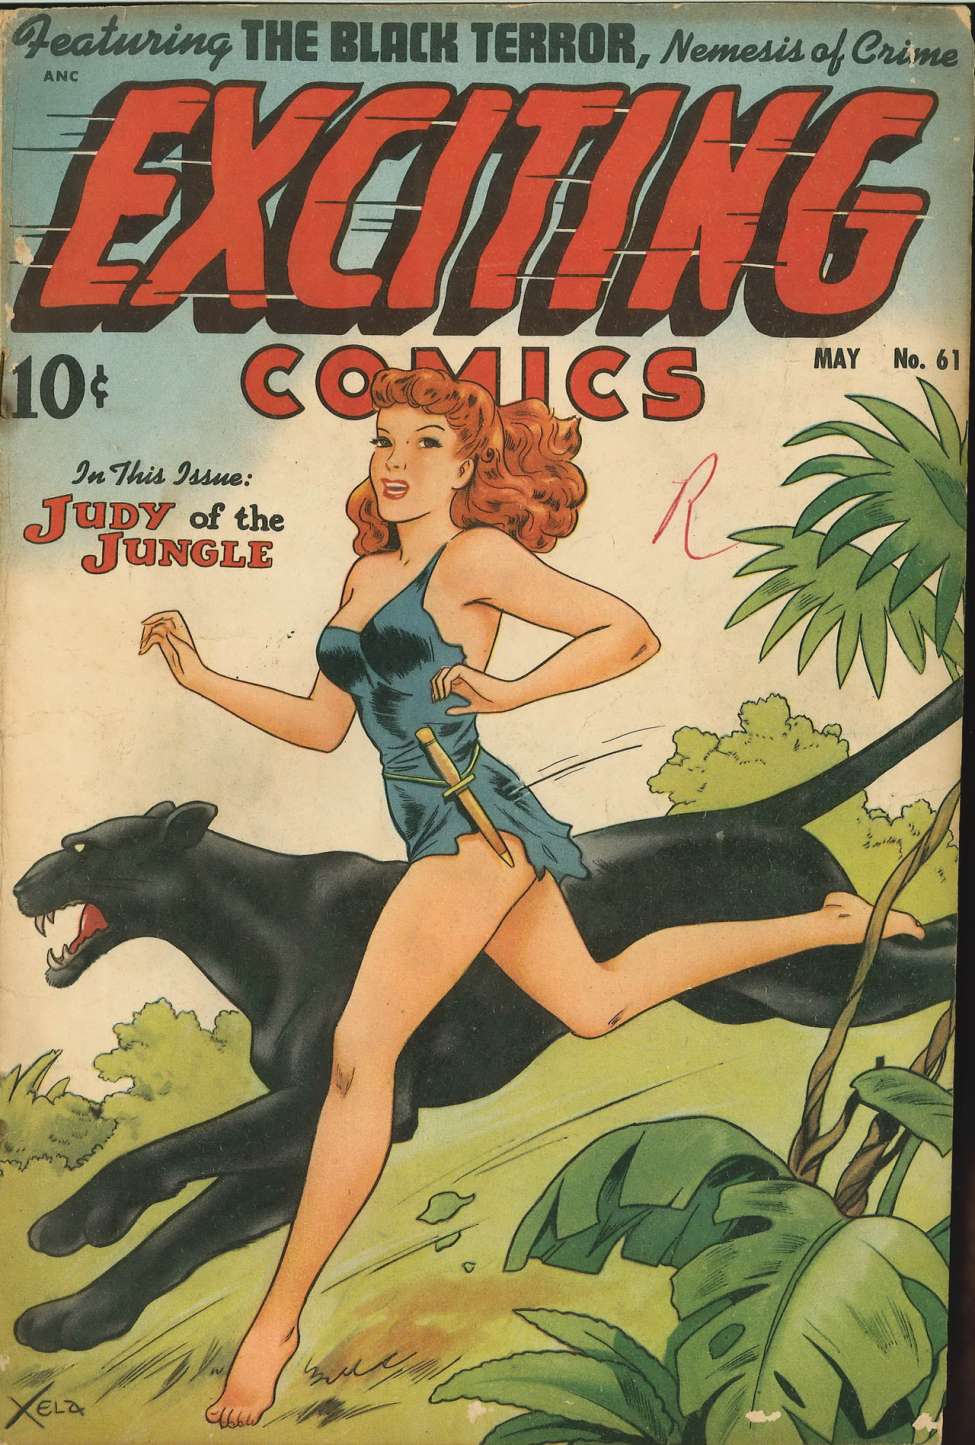 Book Cover For Exciting Comics 61 - Version 1